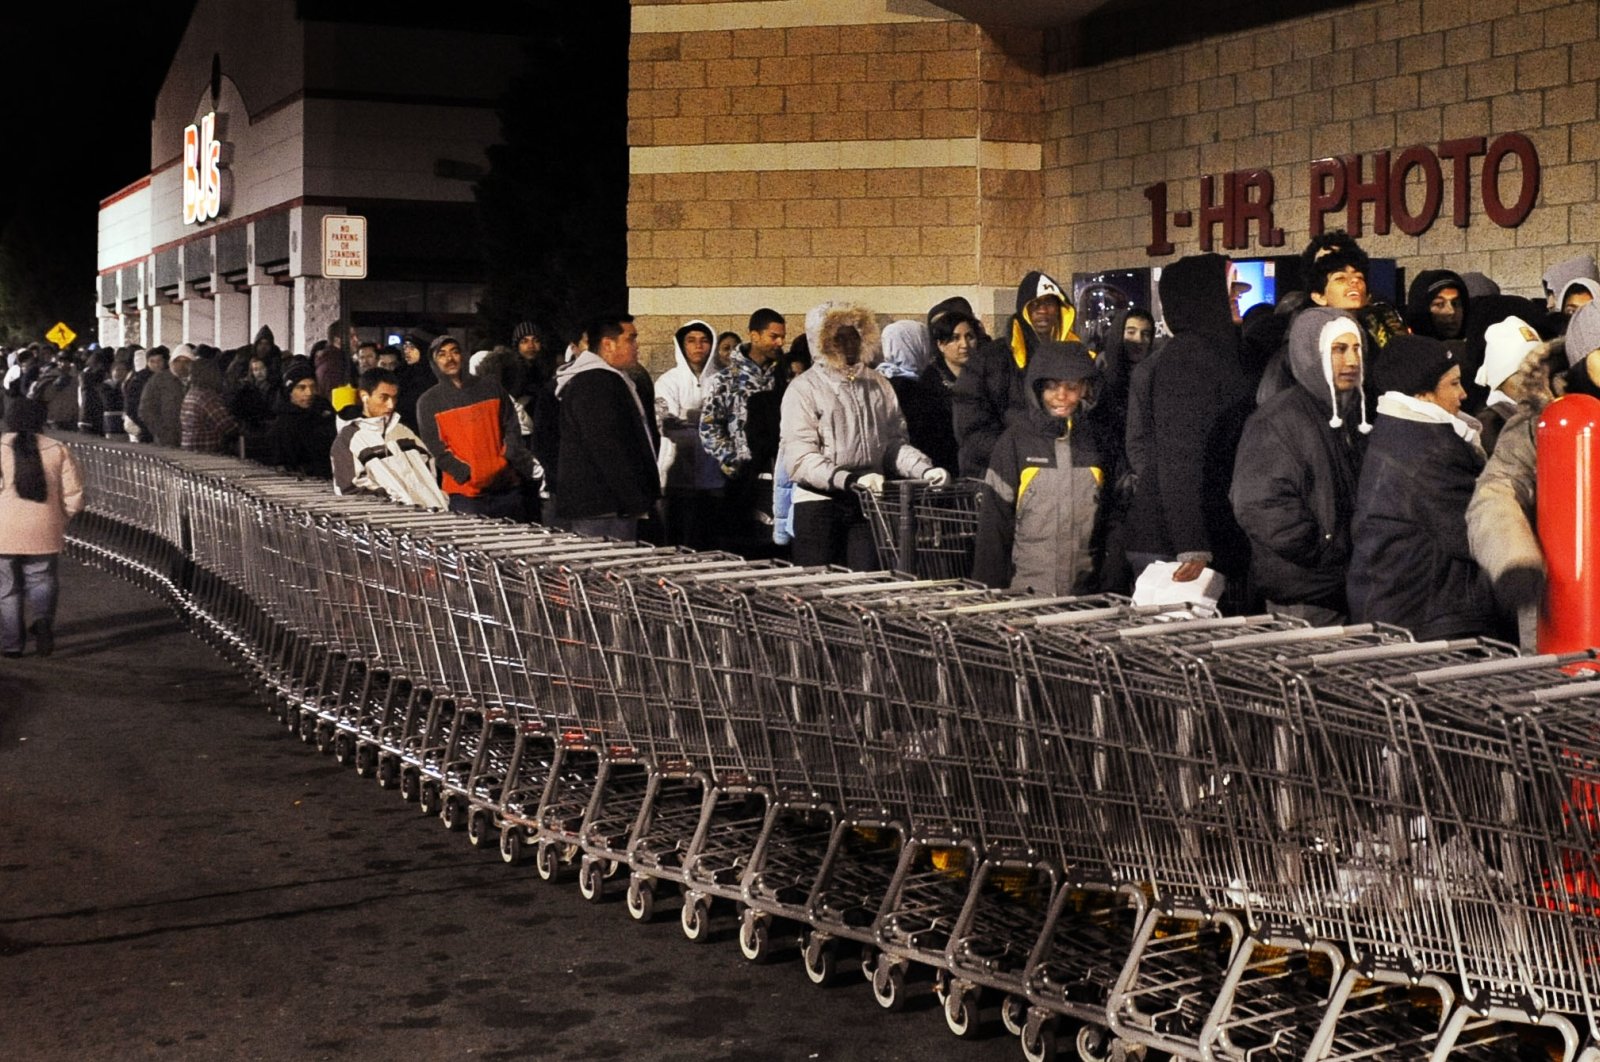 Shopping carts line the sidewalk outside Walmart to keep the waiting crowd in check, Virginia, U.S., Nov. 28, 2008. (Getty Images Photo)